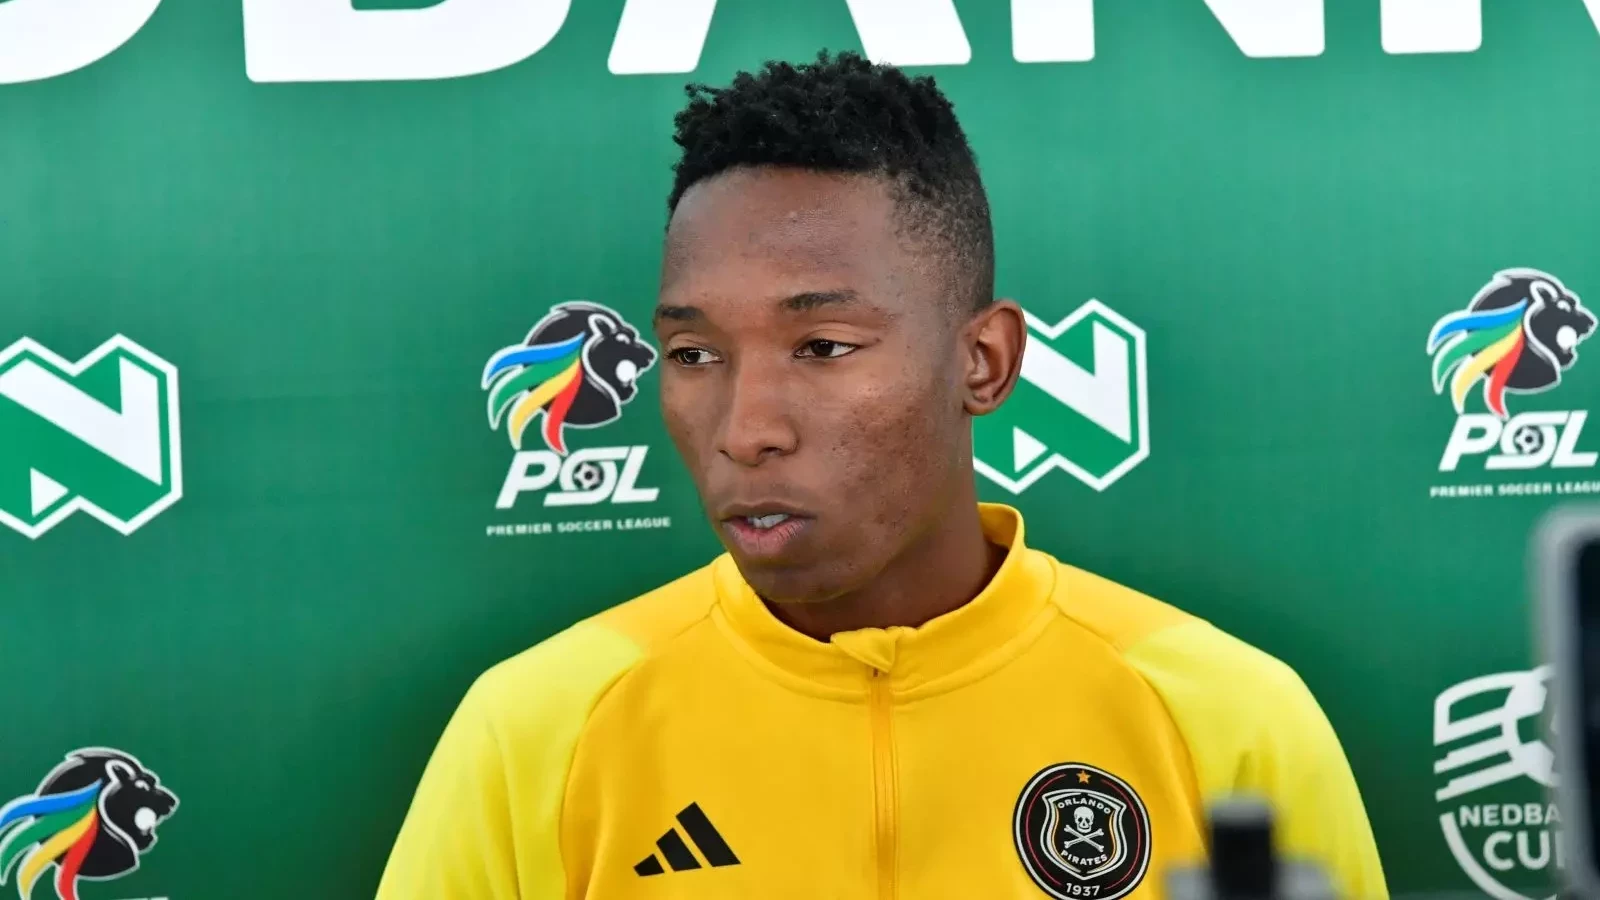 Thalente Mbatha gunning for Nedbank Cup title with Orlando Pirates | soccer